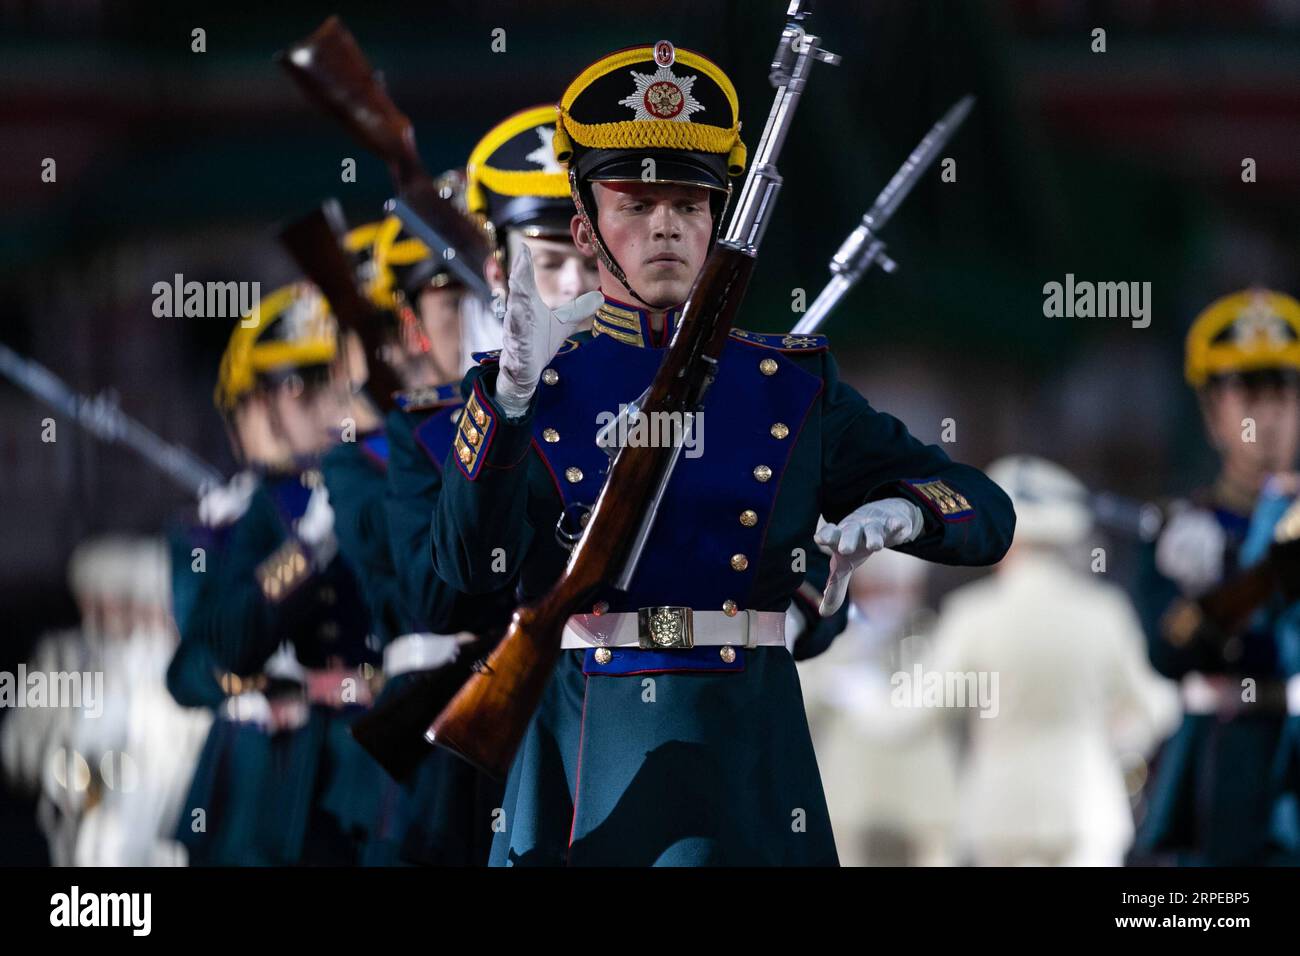 Russland, Militärmusik-Festival in Moskau (190824) -- MOSCOW, Aug. 24, 2019 -- Members of the Russian Honor Guard of the Presidential Regiment perform during the opening day of Spasskaya Tower International Military Music Festival in Moscow, Russia, on Aug. 23, 2019. The annual military music festival opened on Friday on the Red Square in Moscow, and will run until September 1. ) RUSSIA-MOSCOW-MILITARY MUSIC FESTIVAL-OPENING BaixXueqi PUBLICATIONxNOTxINxCHN Stock Photo